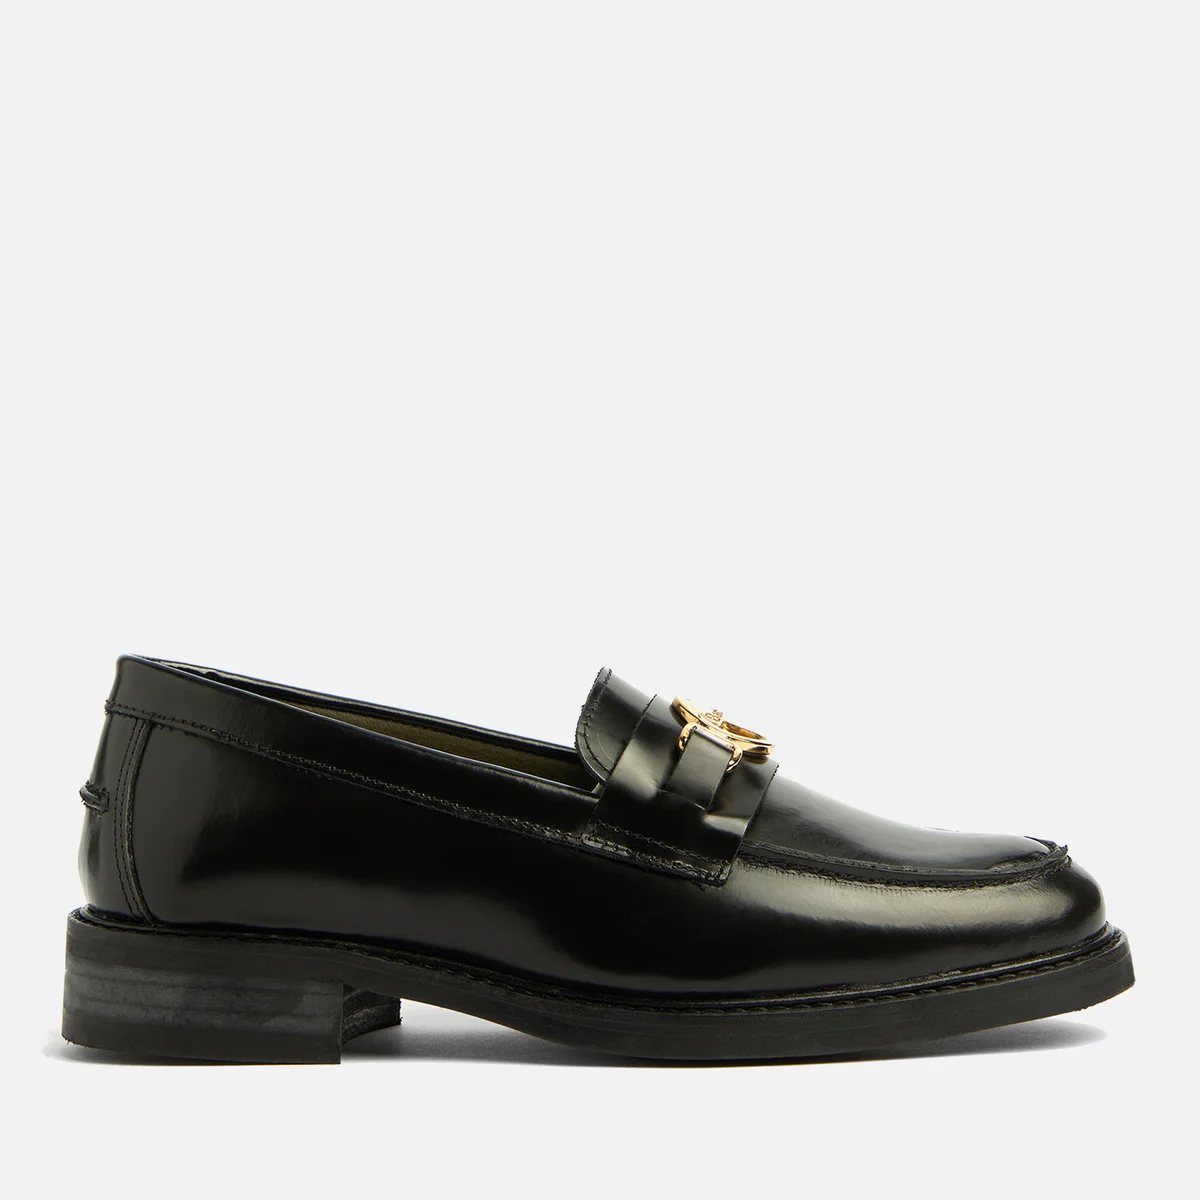 Barbour Women's Barbury Leather Loafers Image 1